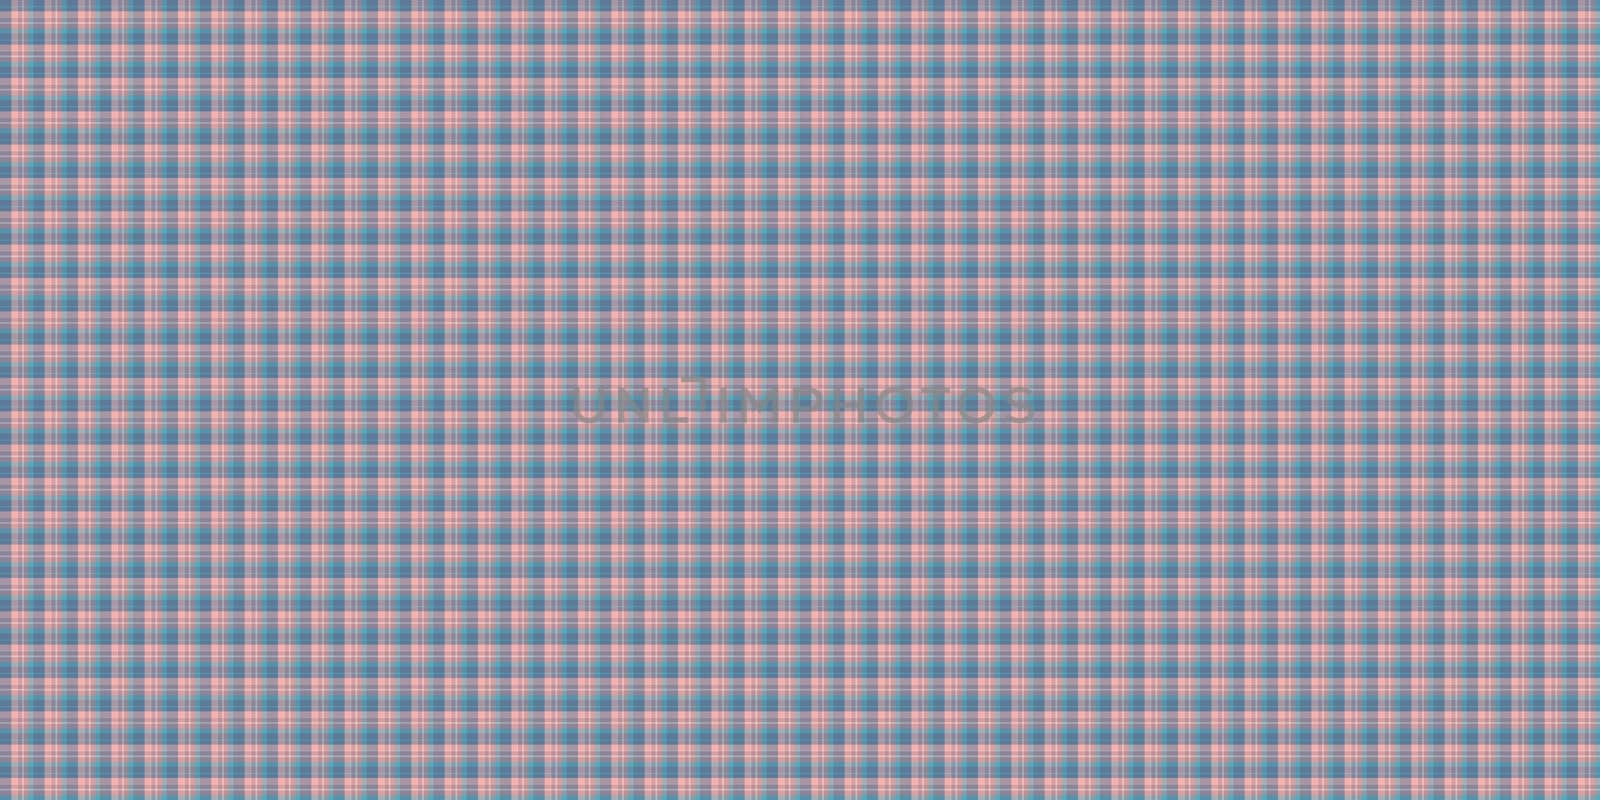 Gray Seamless Scottish Tartan Background Texture by sanches812